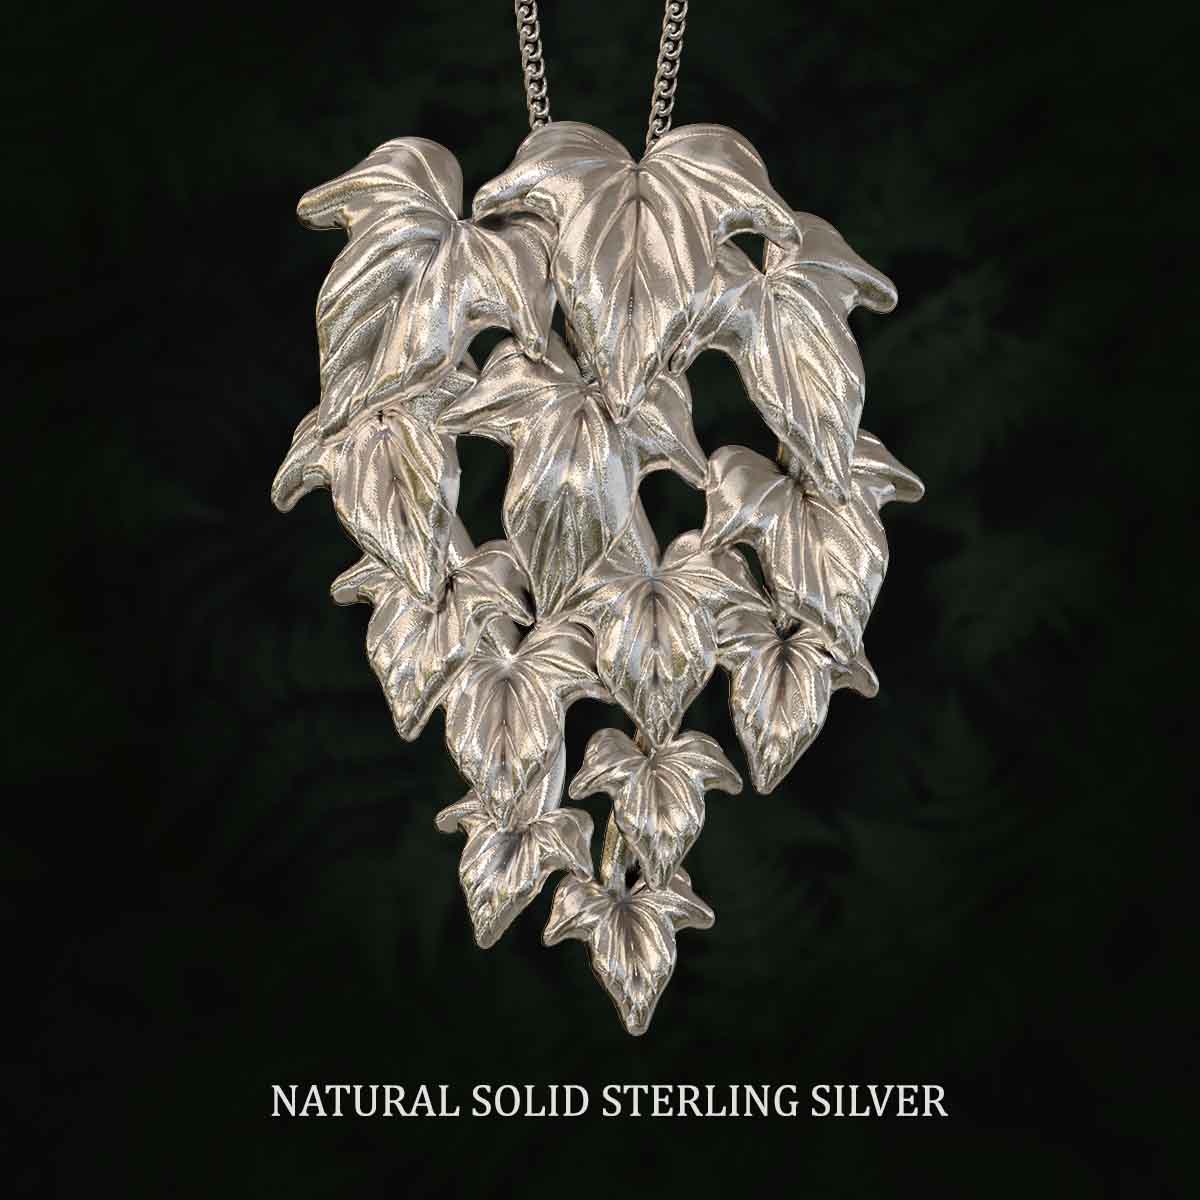     Natural-Satin-Polish-Solid-Sterling-Silver-Flowing-Vine-Medium-Pendant-Jewelry-For-Necklace